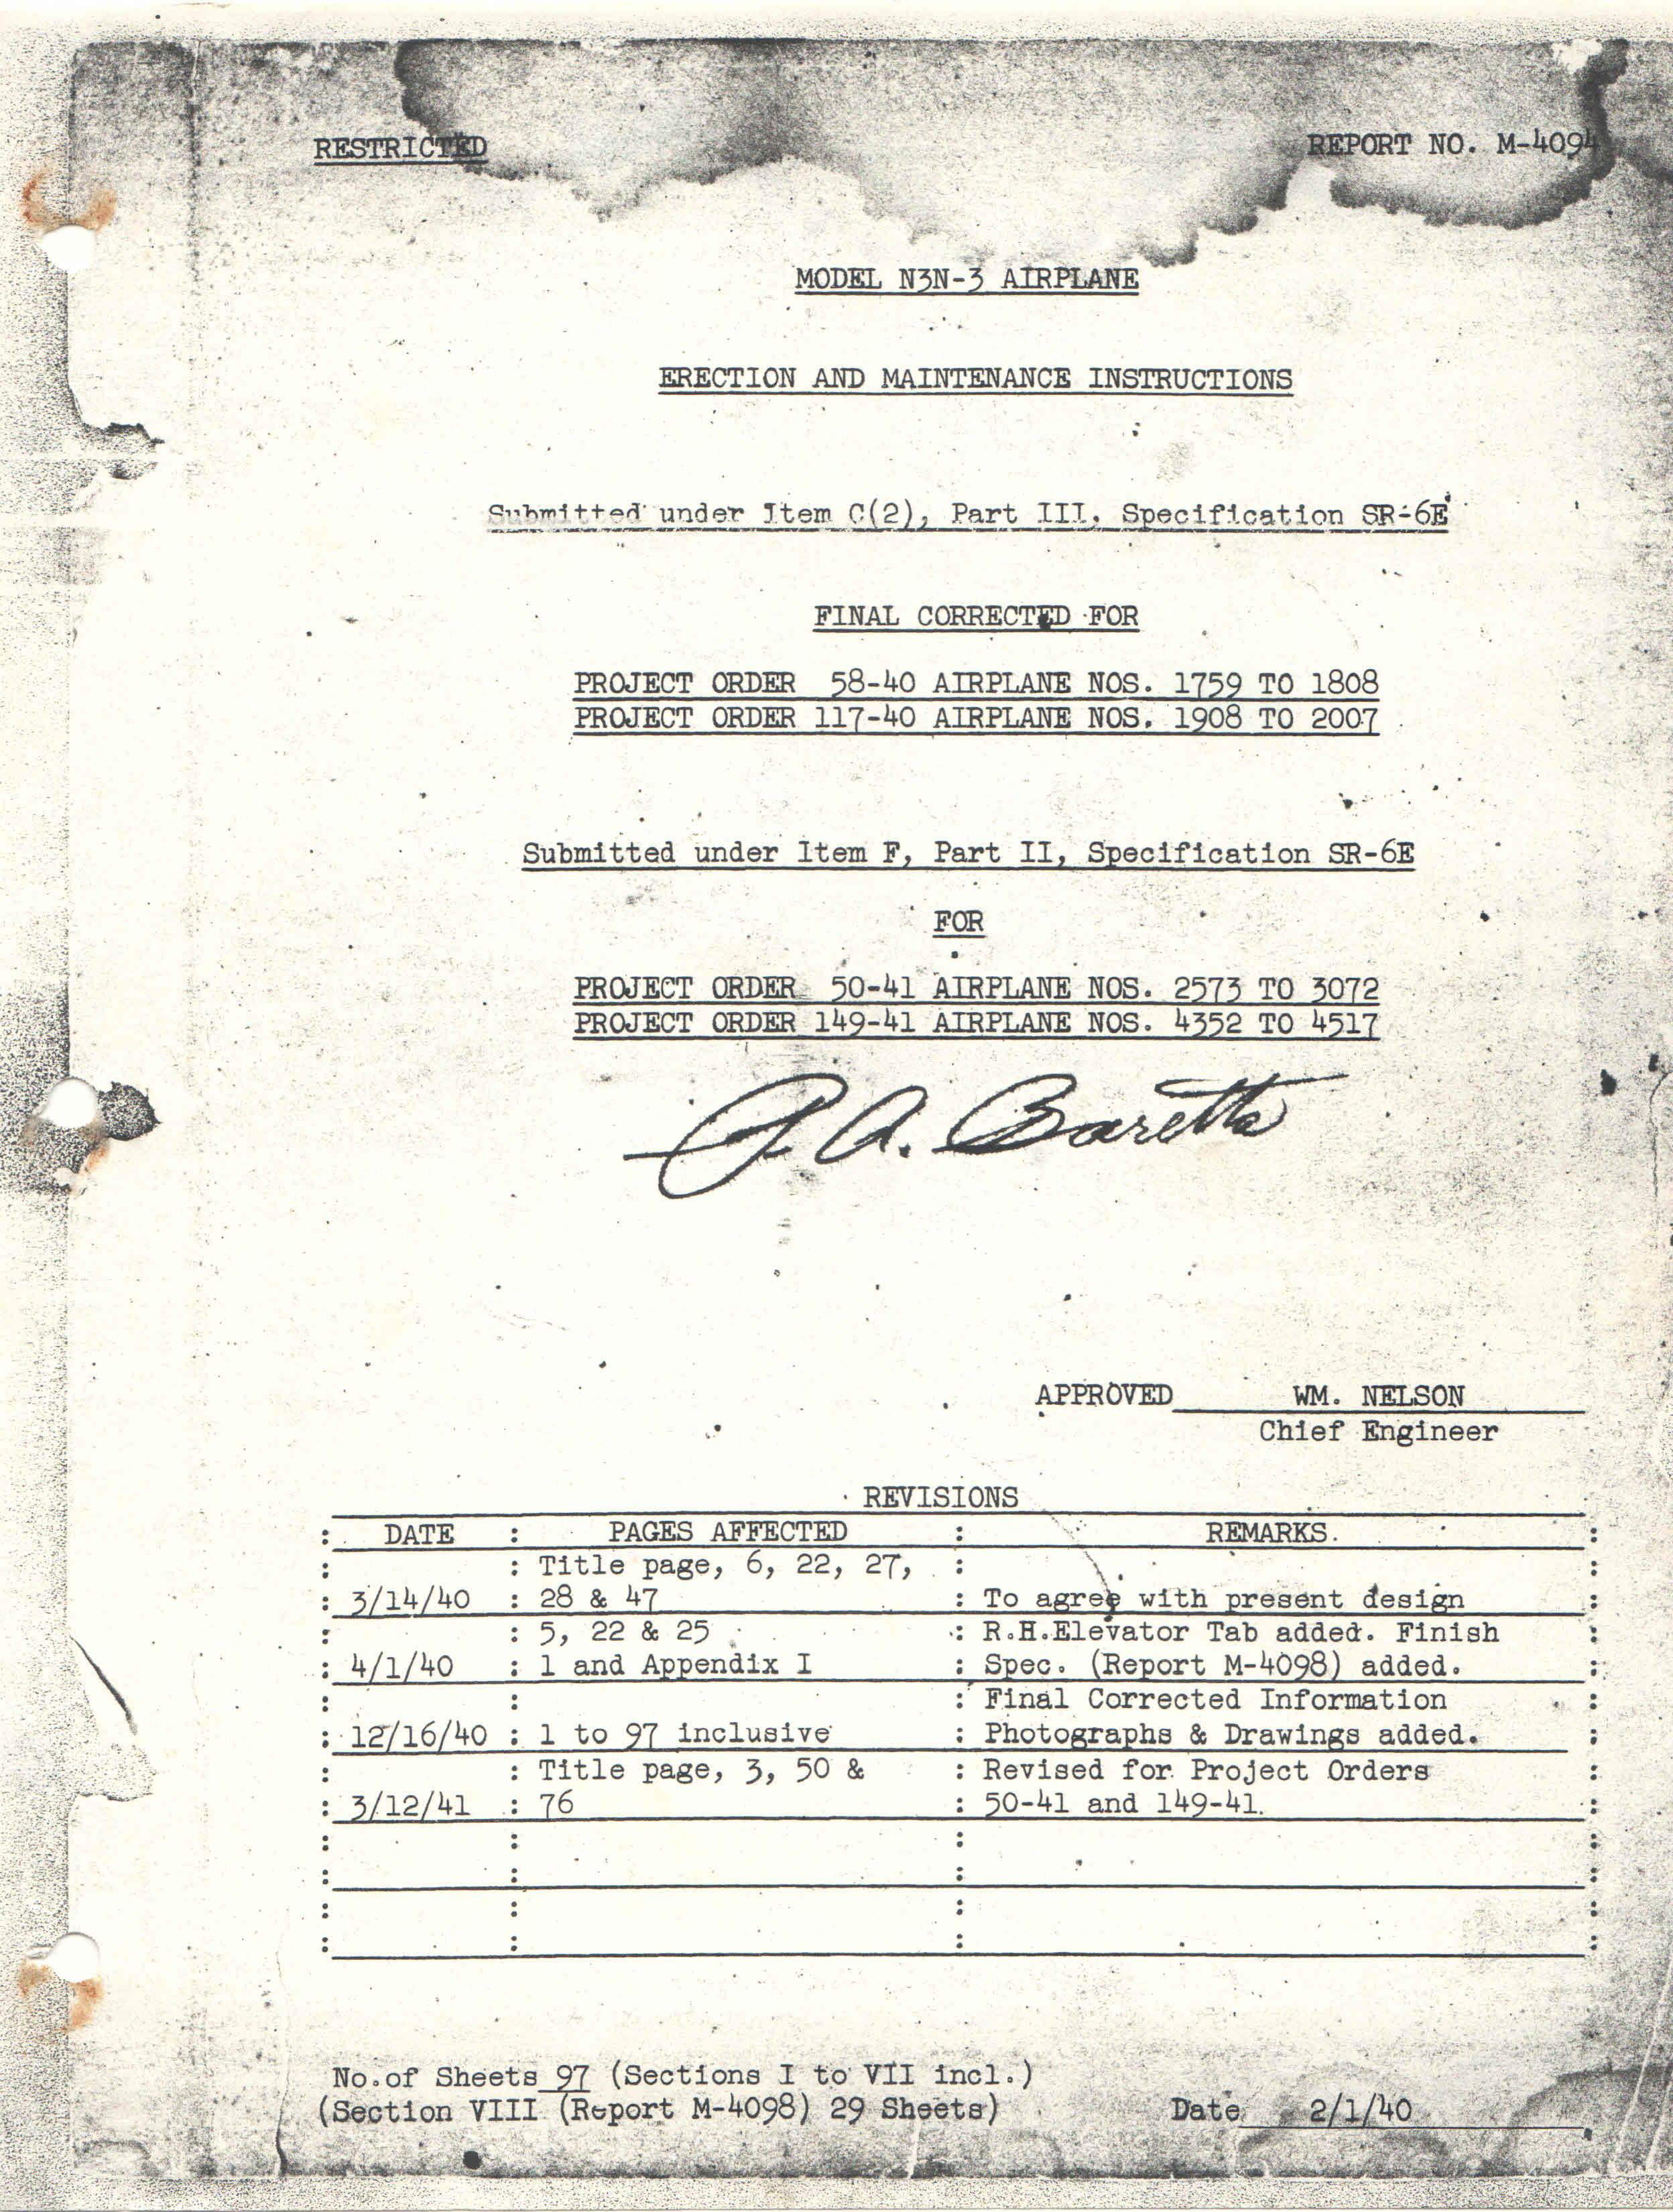 Sample page 1 from AirCorps Library document: Erection and Maintenance for Model N3N-3